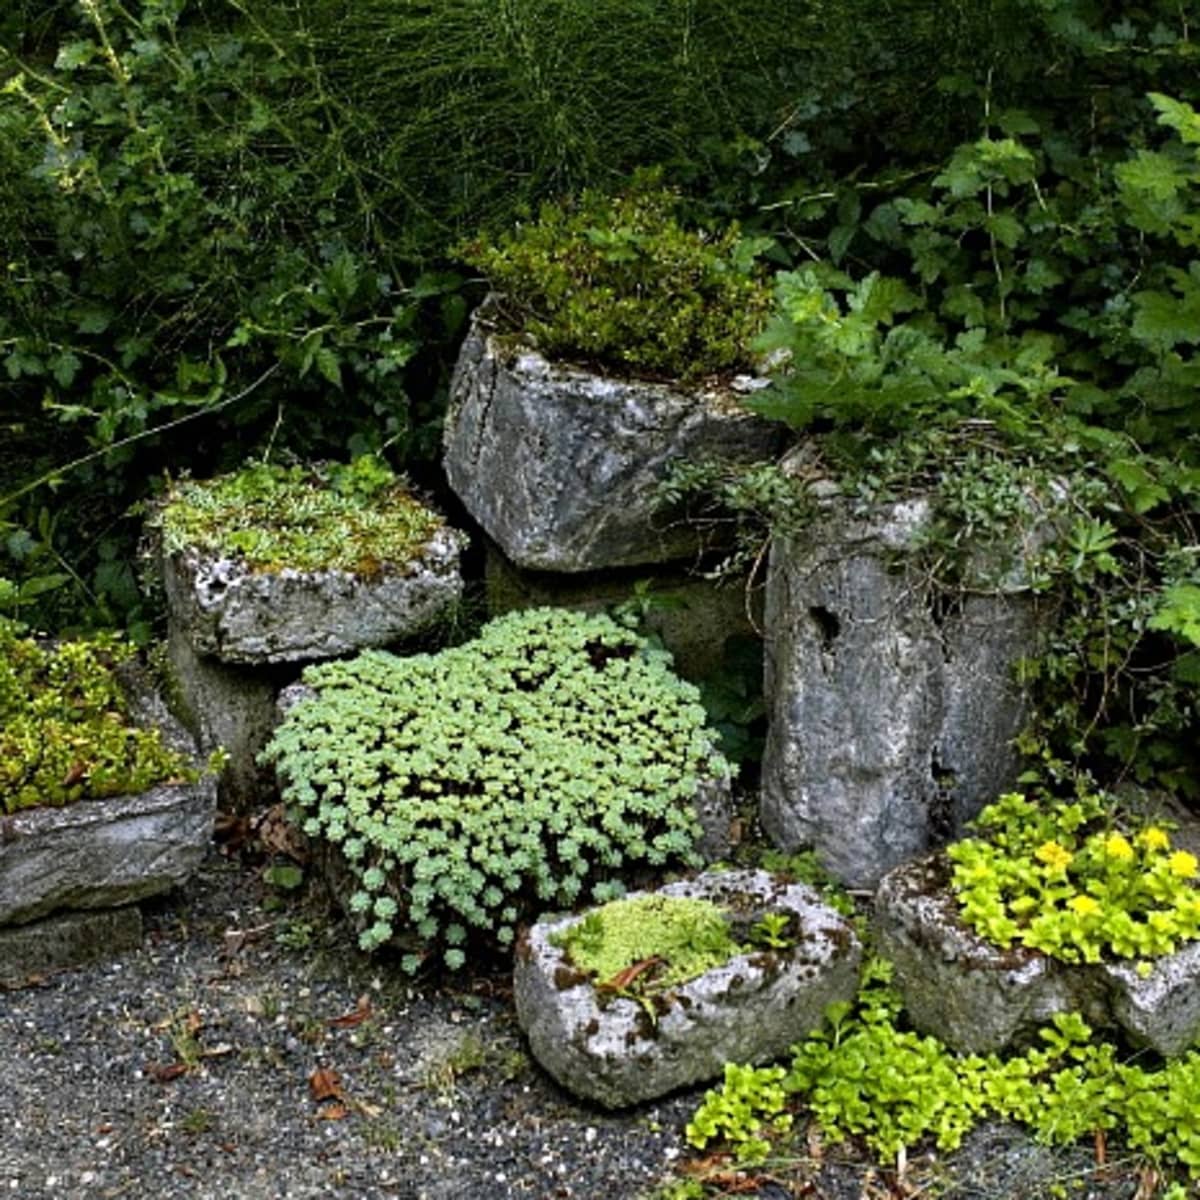 How to Build Rustic Stone Planters for Your Garden - Dengarden